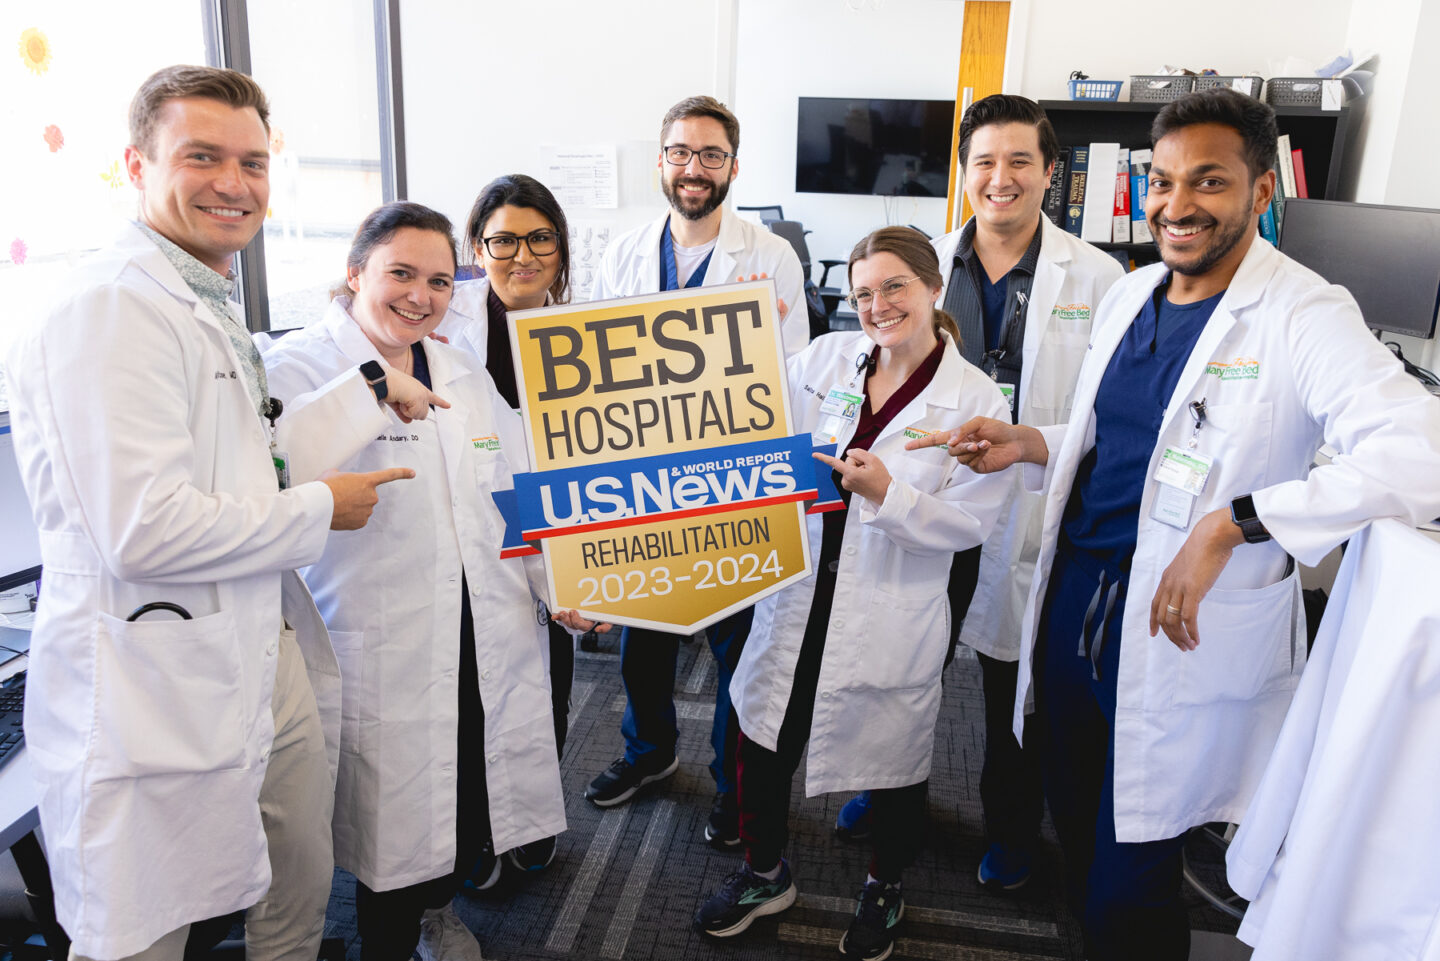 A group of seven residents in white lab coats are standing together in a room, smiling and holding a large sign that reads "BEST HOSPITALS, U.S. News & World Report, Rehabilitation 2023-2024" The individuals are standing close together, some pointing at the sign, celebrating their achievement